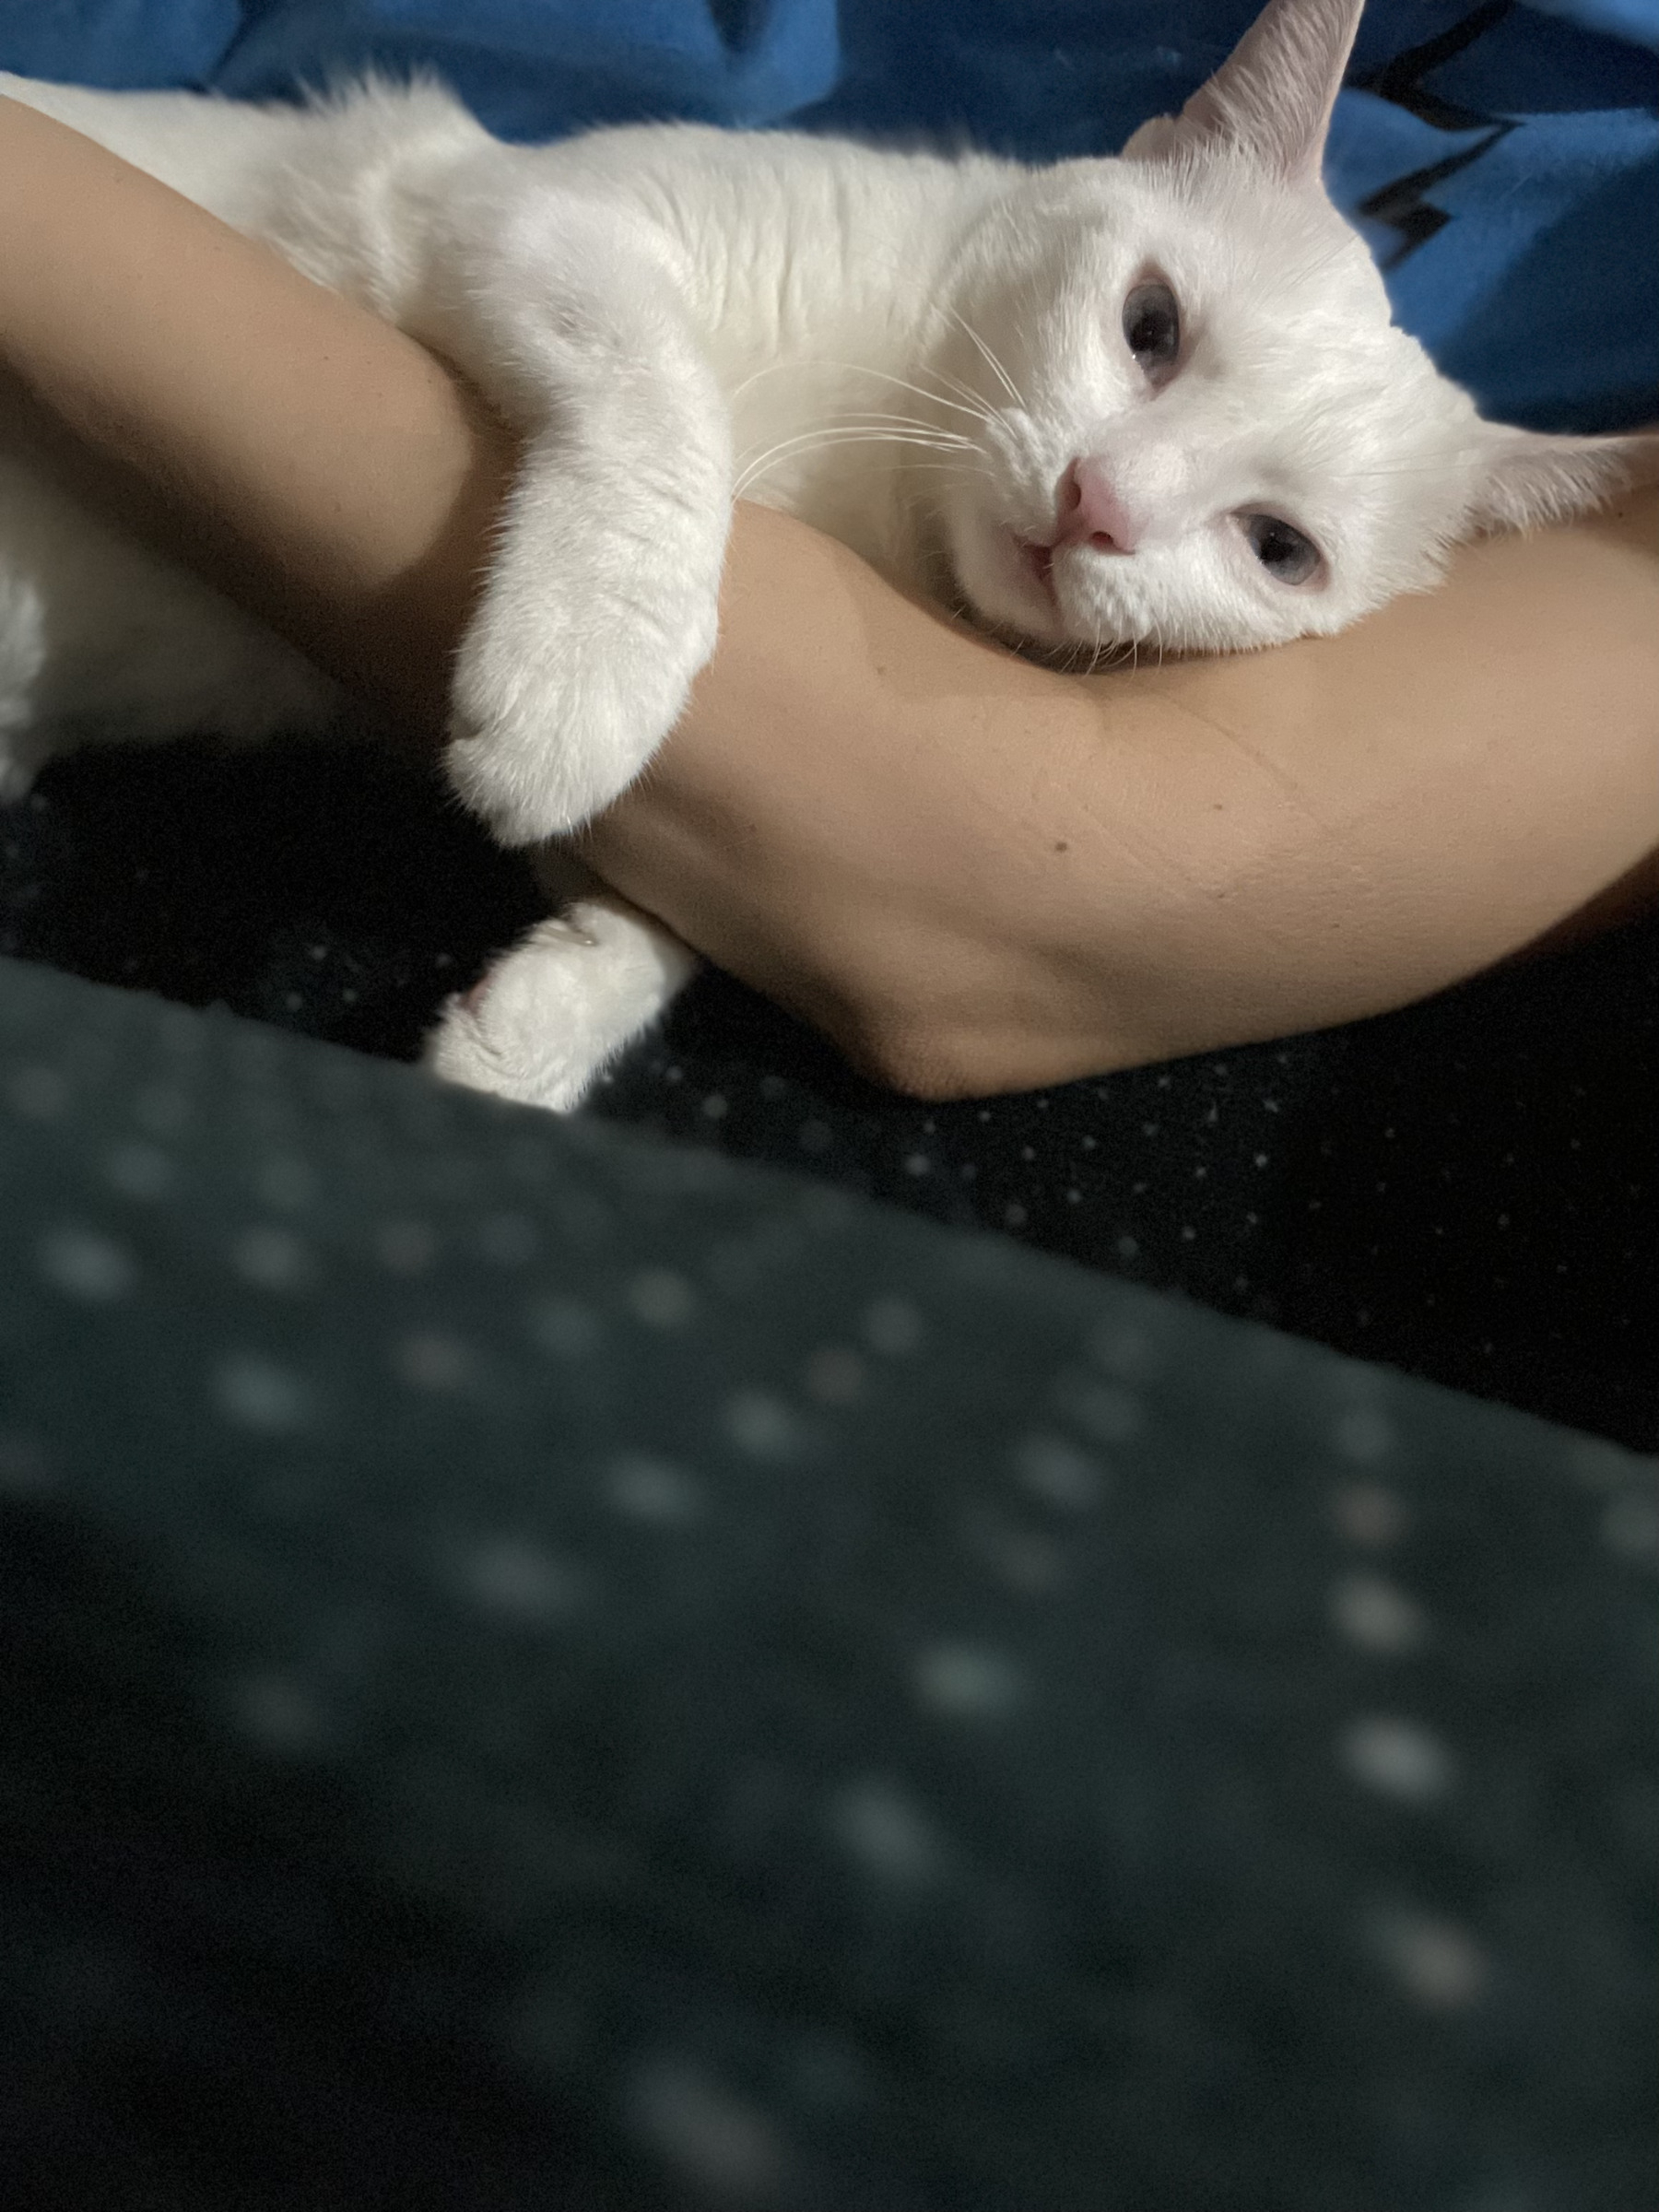 My beloved white cat hugging my arm seconds before she fell asleep